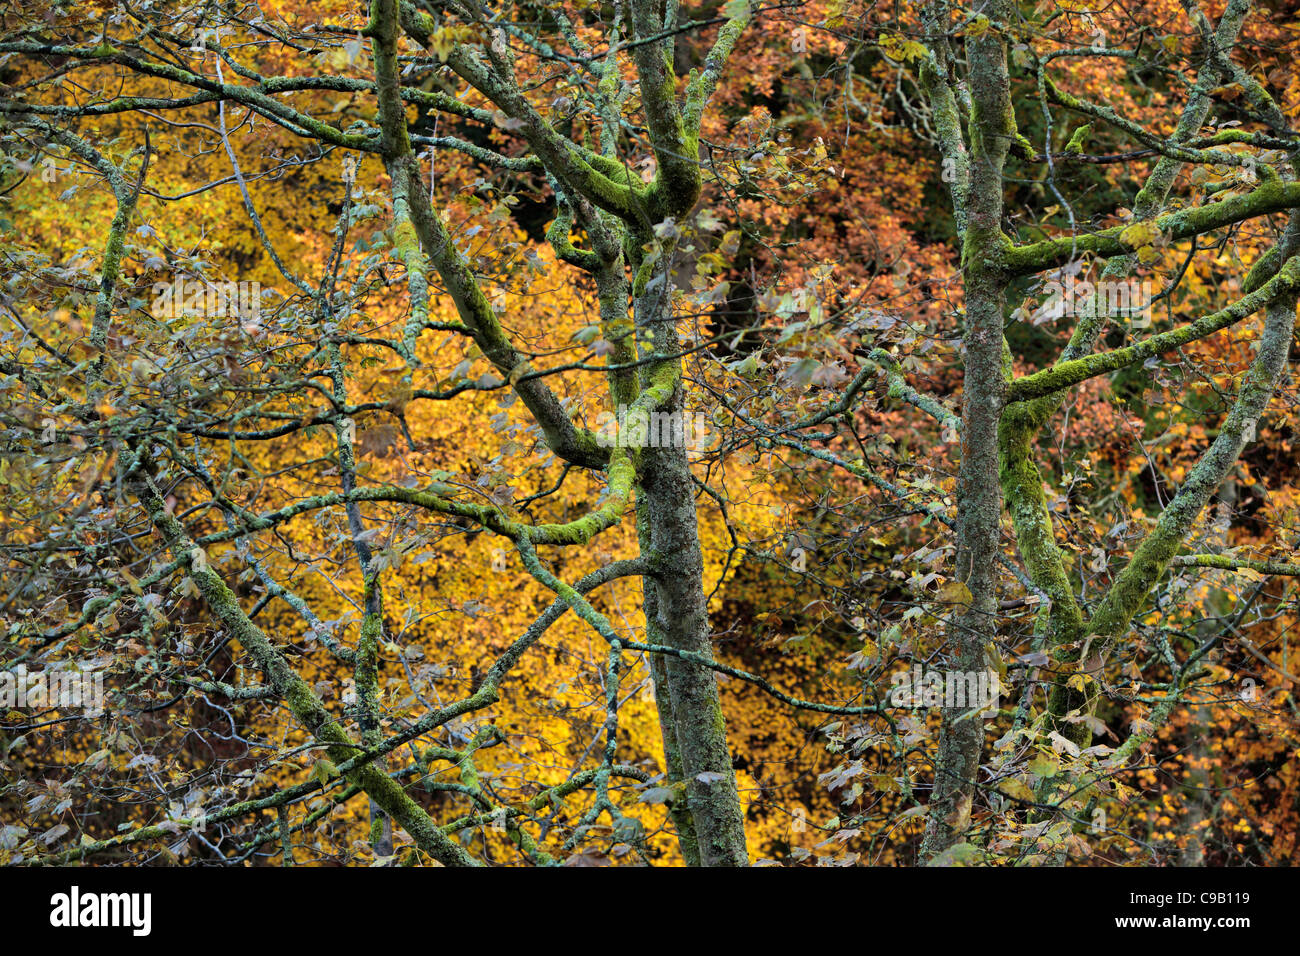 Brightly colored autumn foliage of Strid Wood along the banks of the River Wharfe in Wharfedale, Yorkshire, England Stock Photo